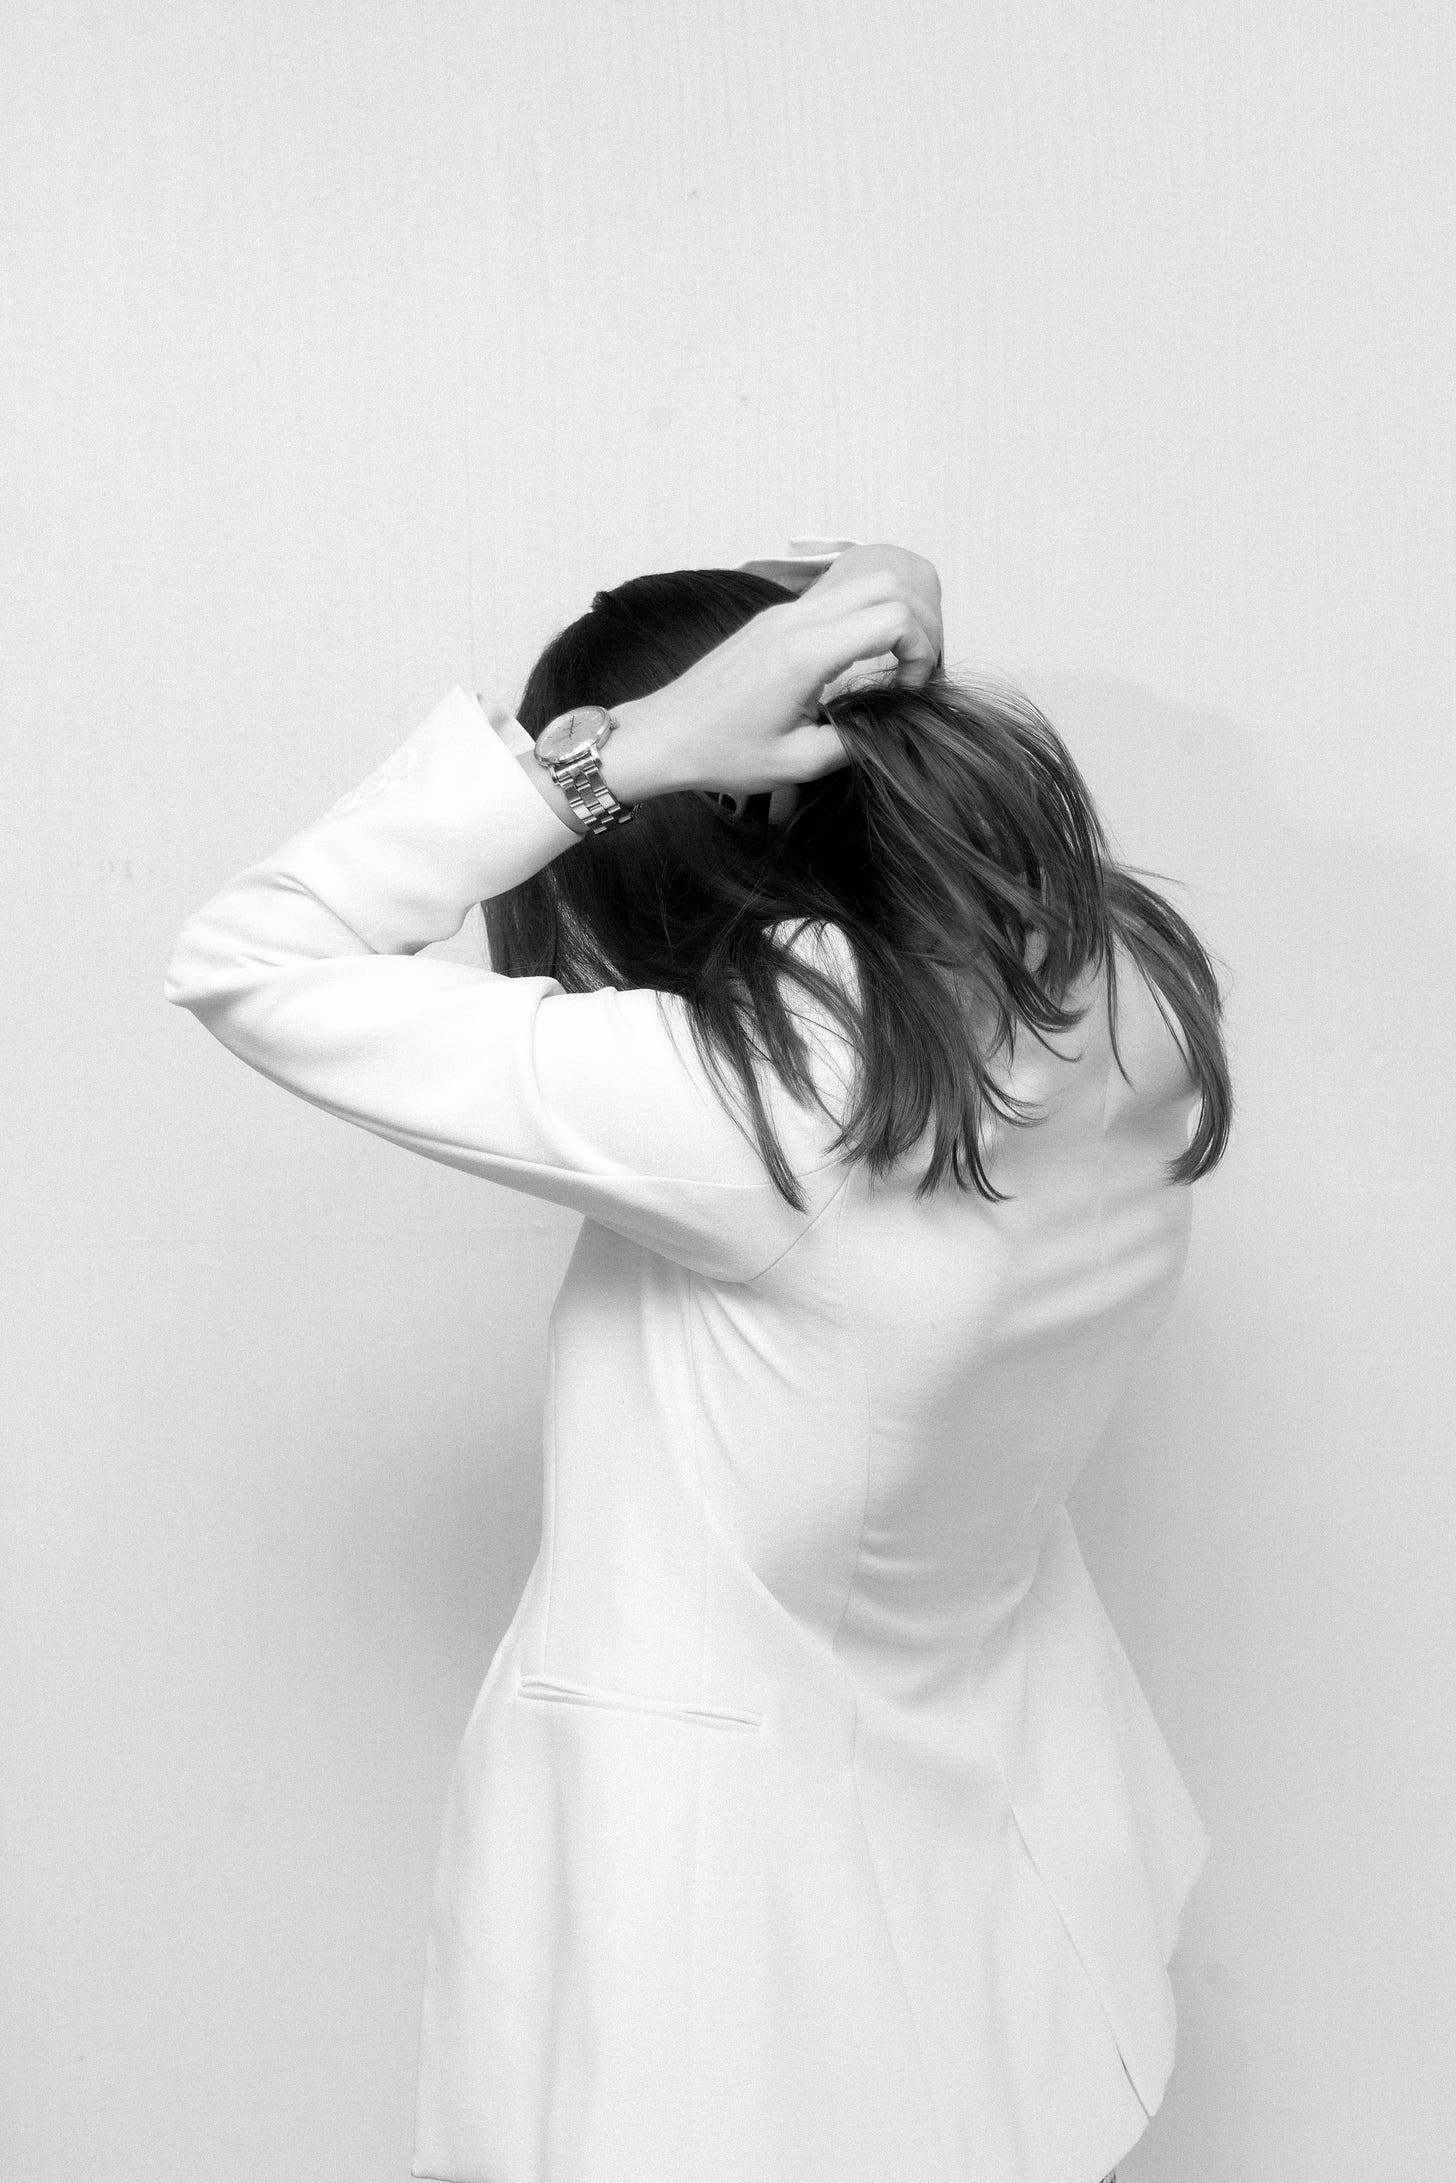 Image of a woman in a white suit with her hands over her head, in a gesture of overwhelm. Free image from Upsplash